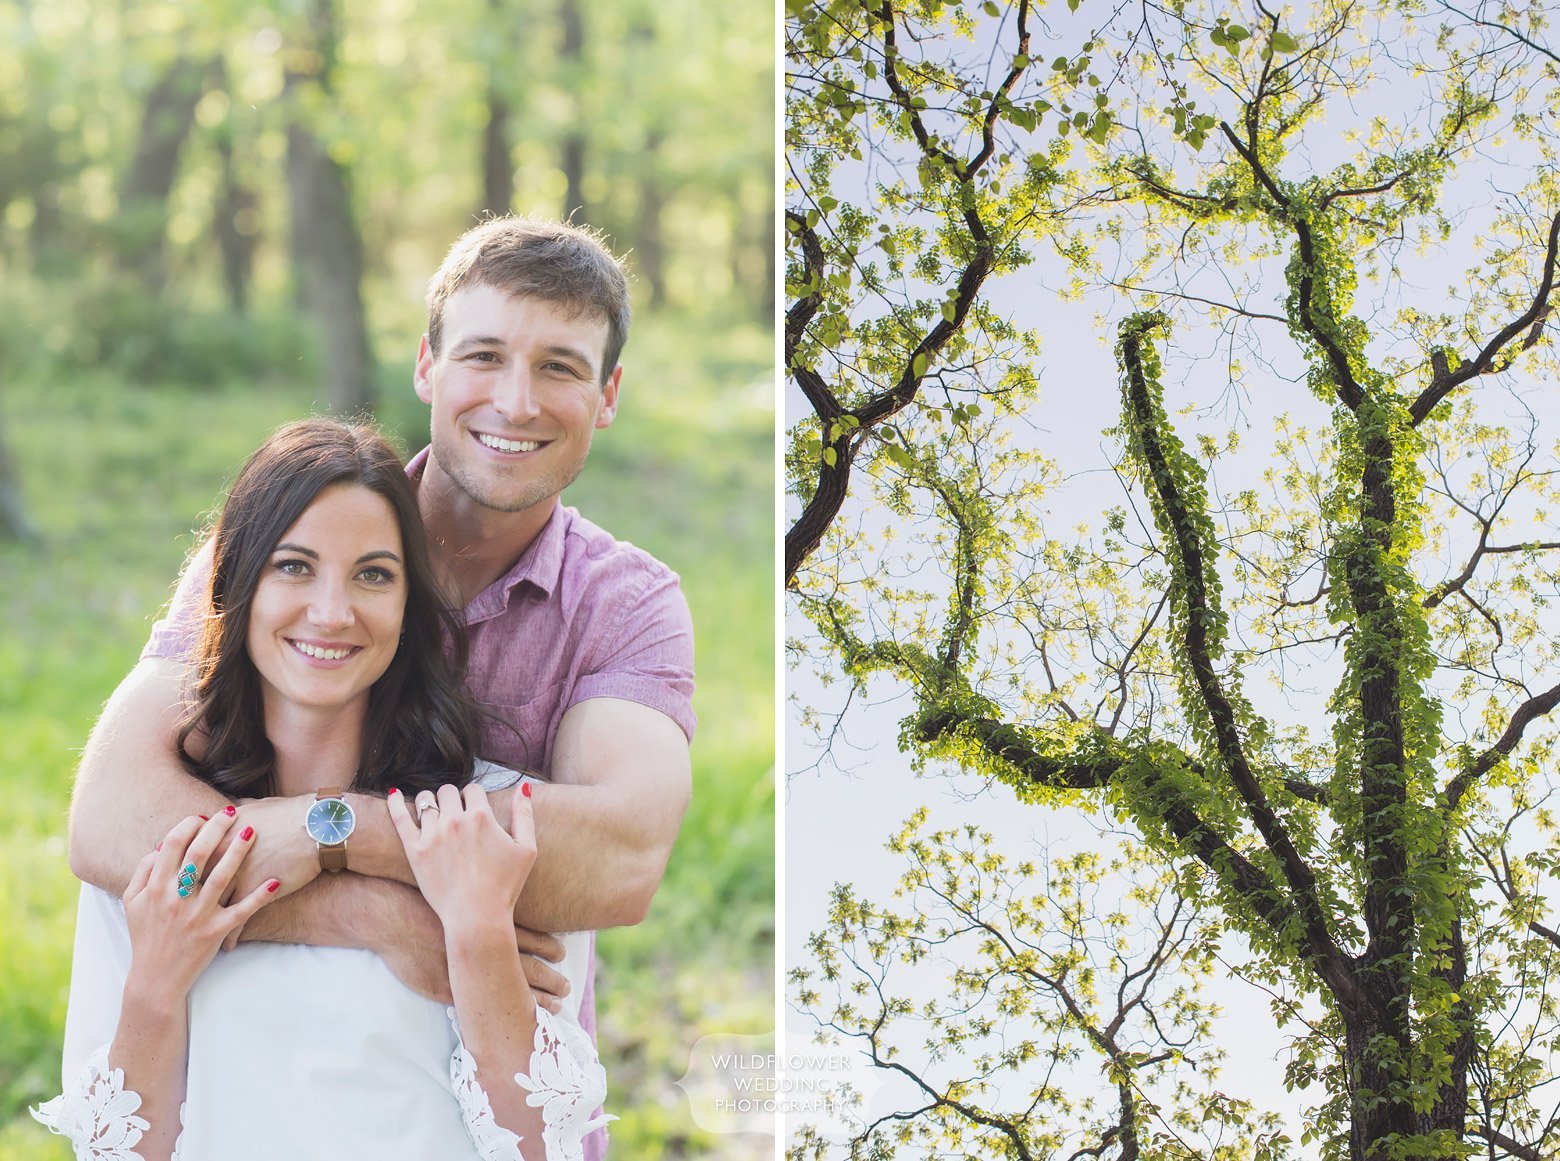 Cute engagement photo pose during this natural photo session on a farm in Latham, MO.